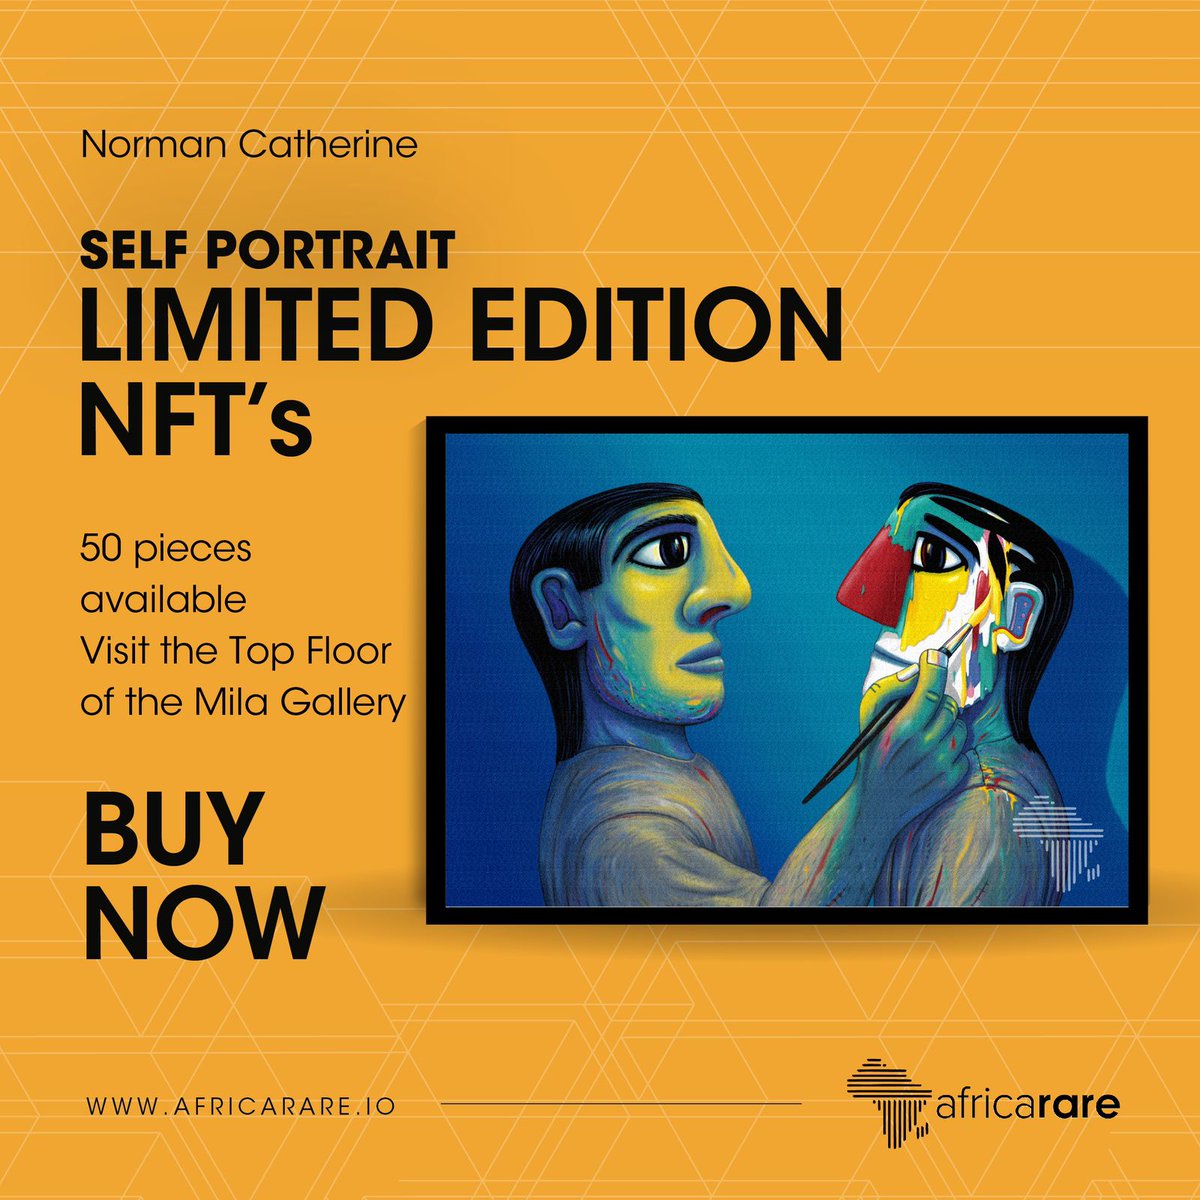 The Norman-Catherine limited self portrait is now available.

A piece of art worth collecting.

Don't forget to click on the link below.

opensea.io/collection/nor…

#Ubuntuland 
#Metaverse
#FutureproofAfrica